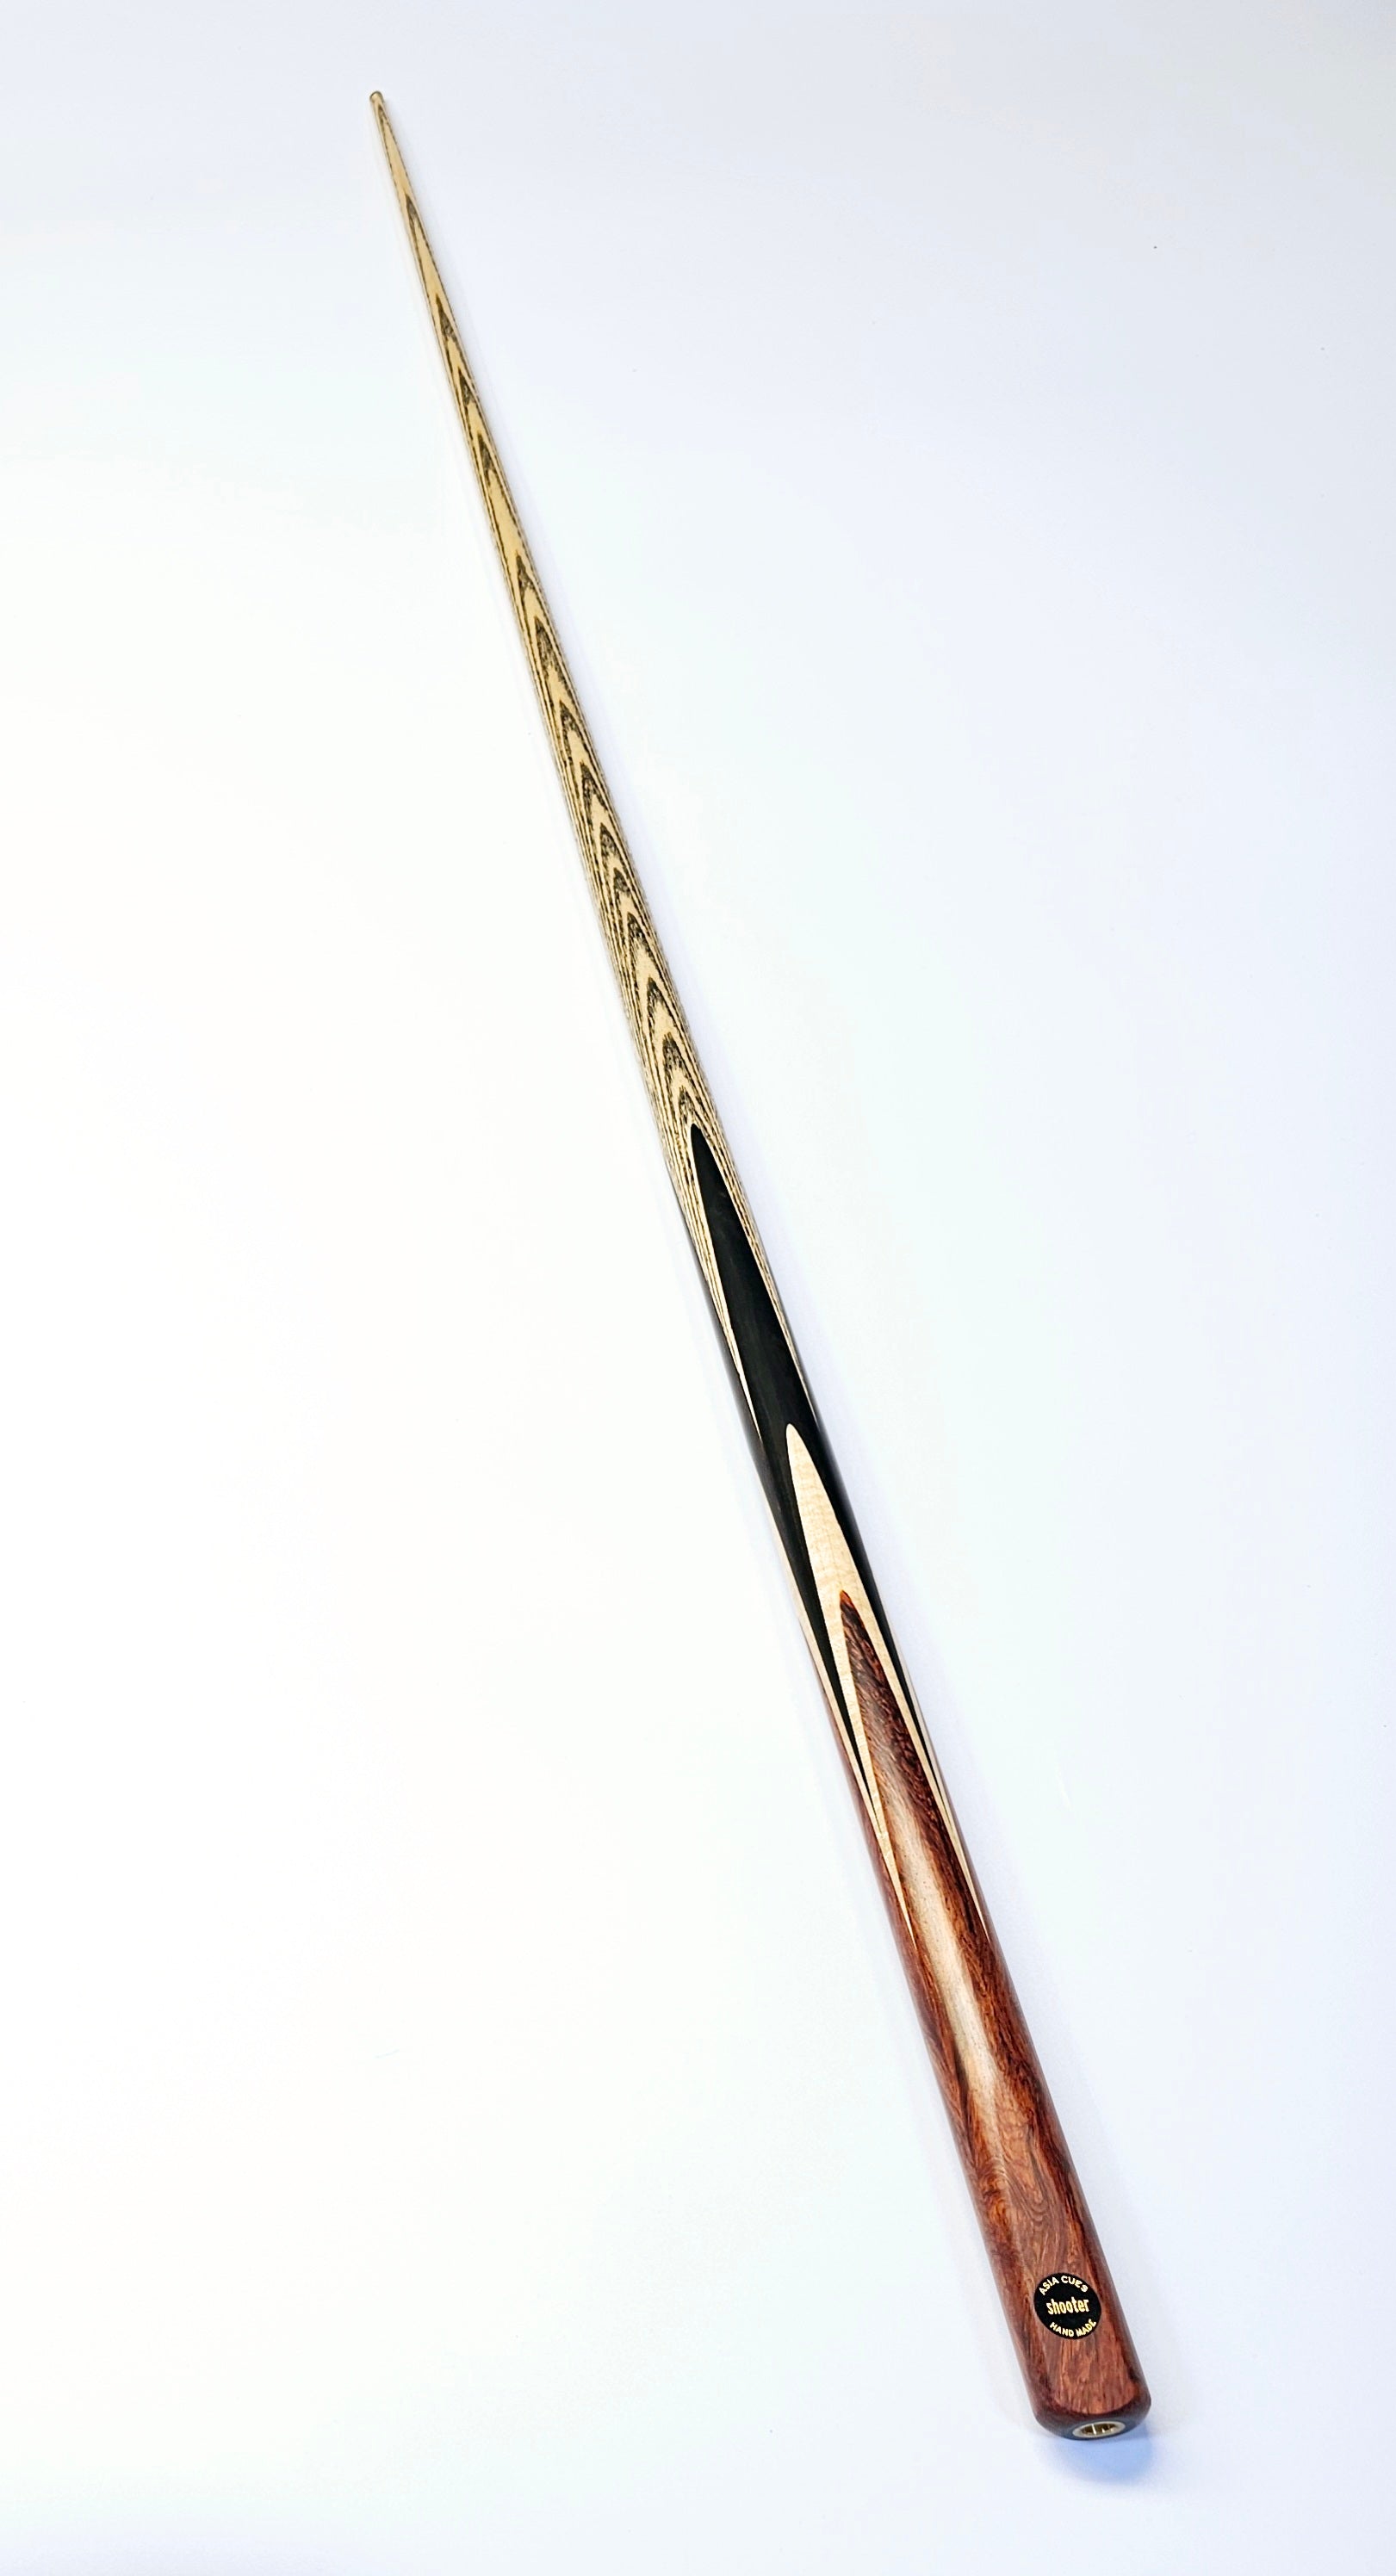 Asia Cues Shooter - One Piece Snooker Cue 9.7mm Tip, 18.1oz, 58"